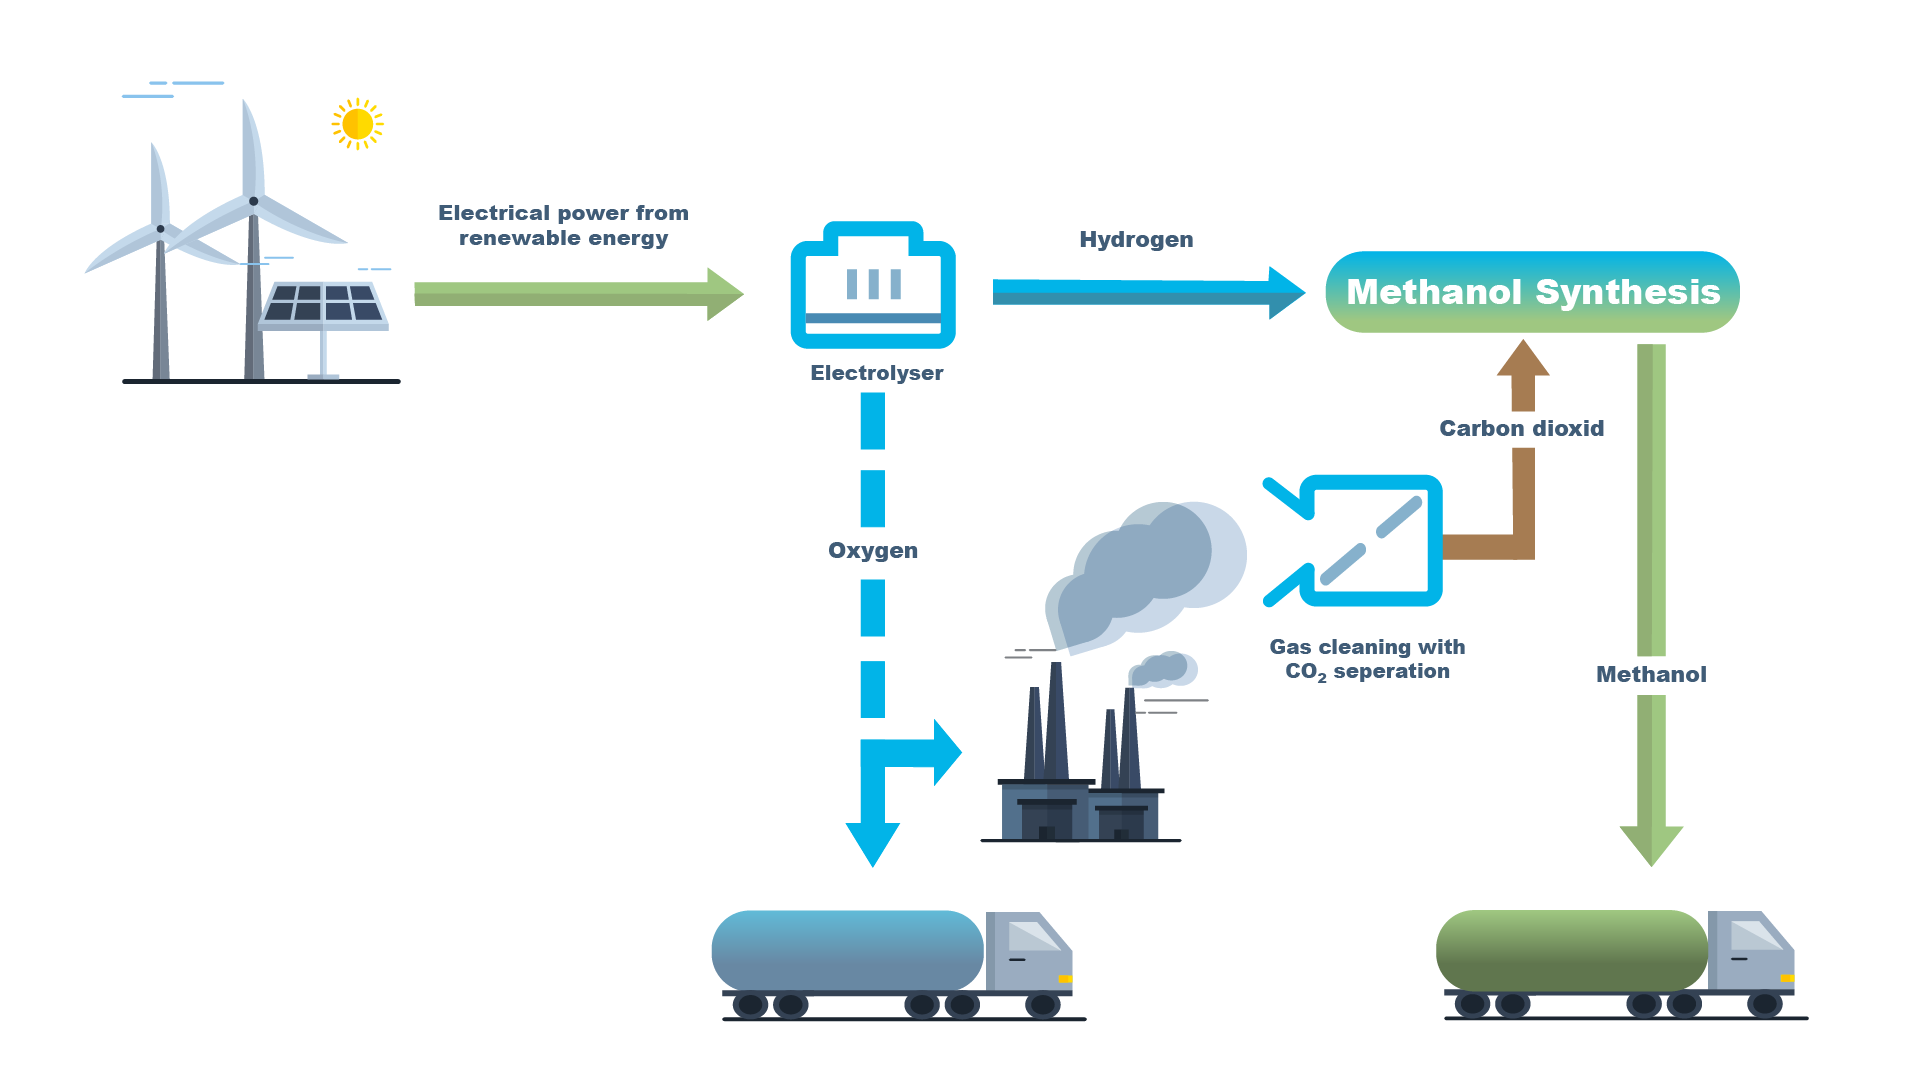 Synthetic methanol production process